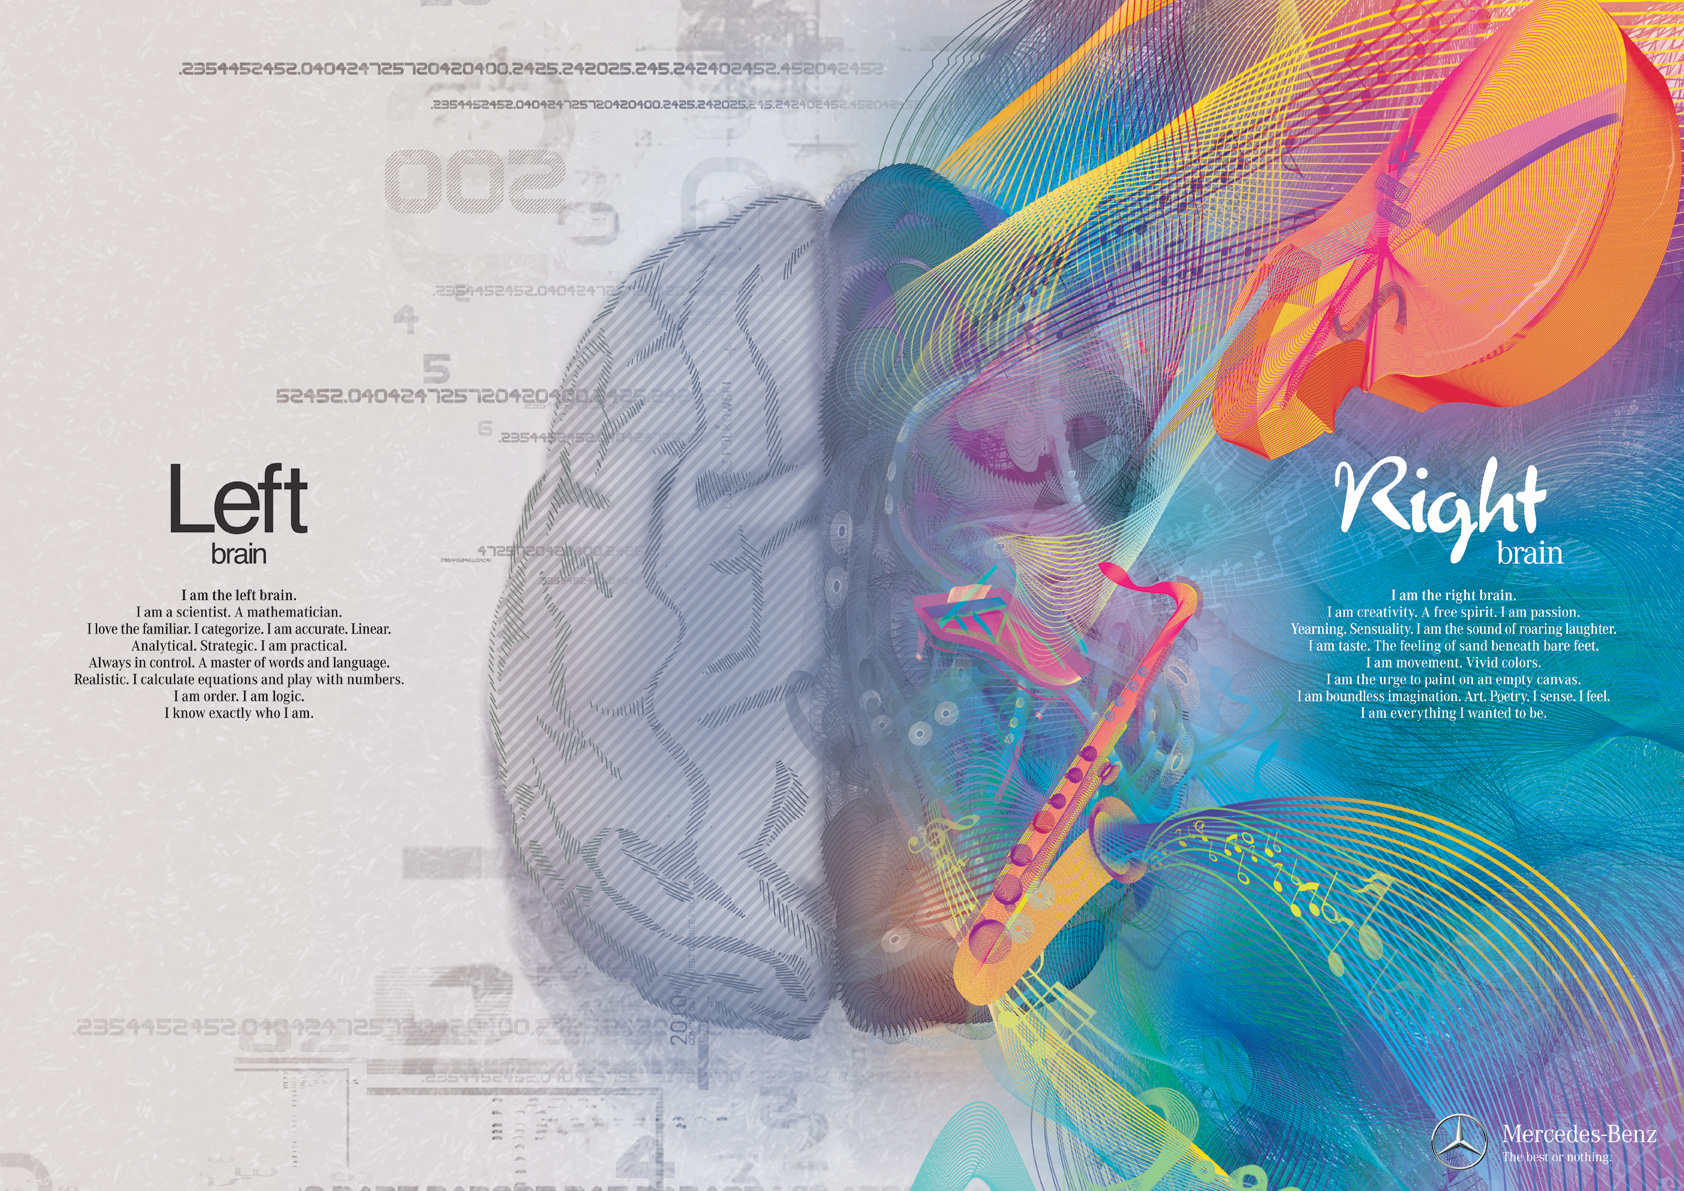 illustration of the brain with grid and numbers behind left side and colored swooshes, music notes, instruments and staffs on the right